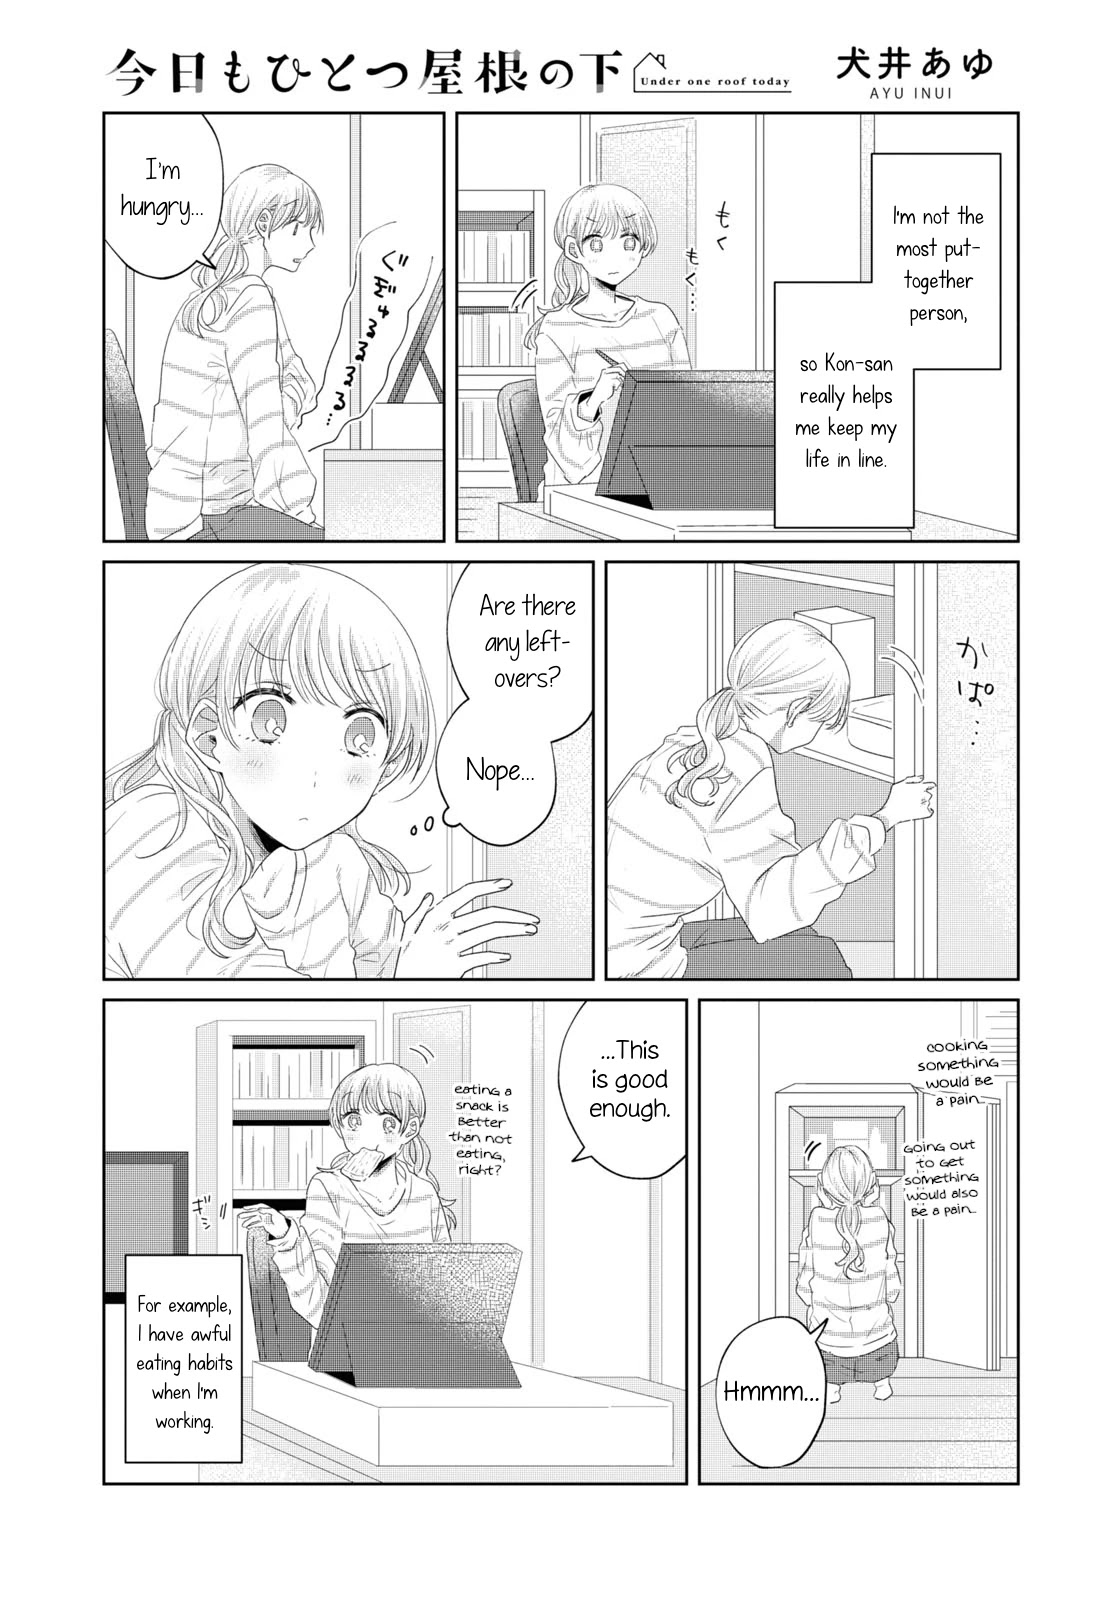 Today, We Continue Our Lives Together Under The Same Roof - Page 1